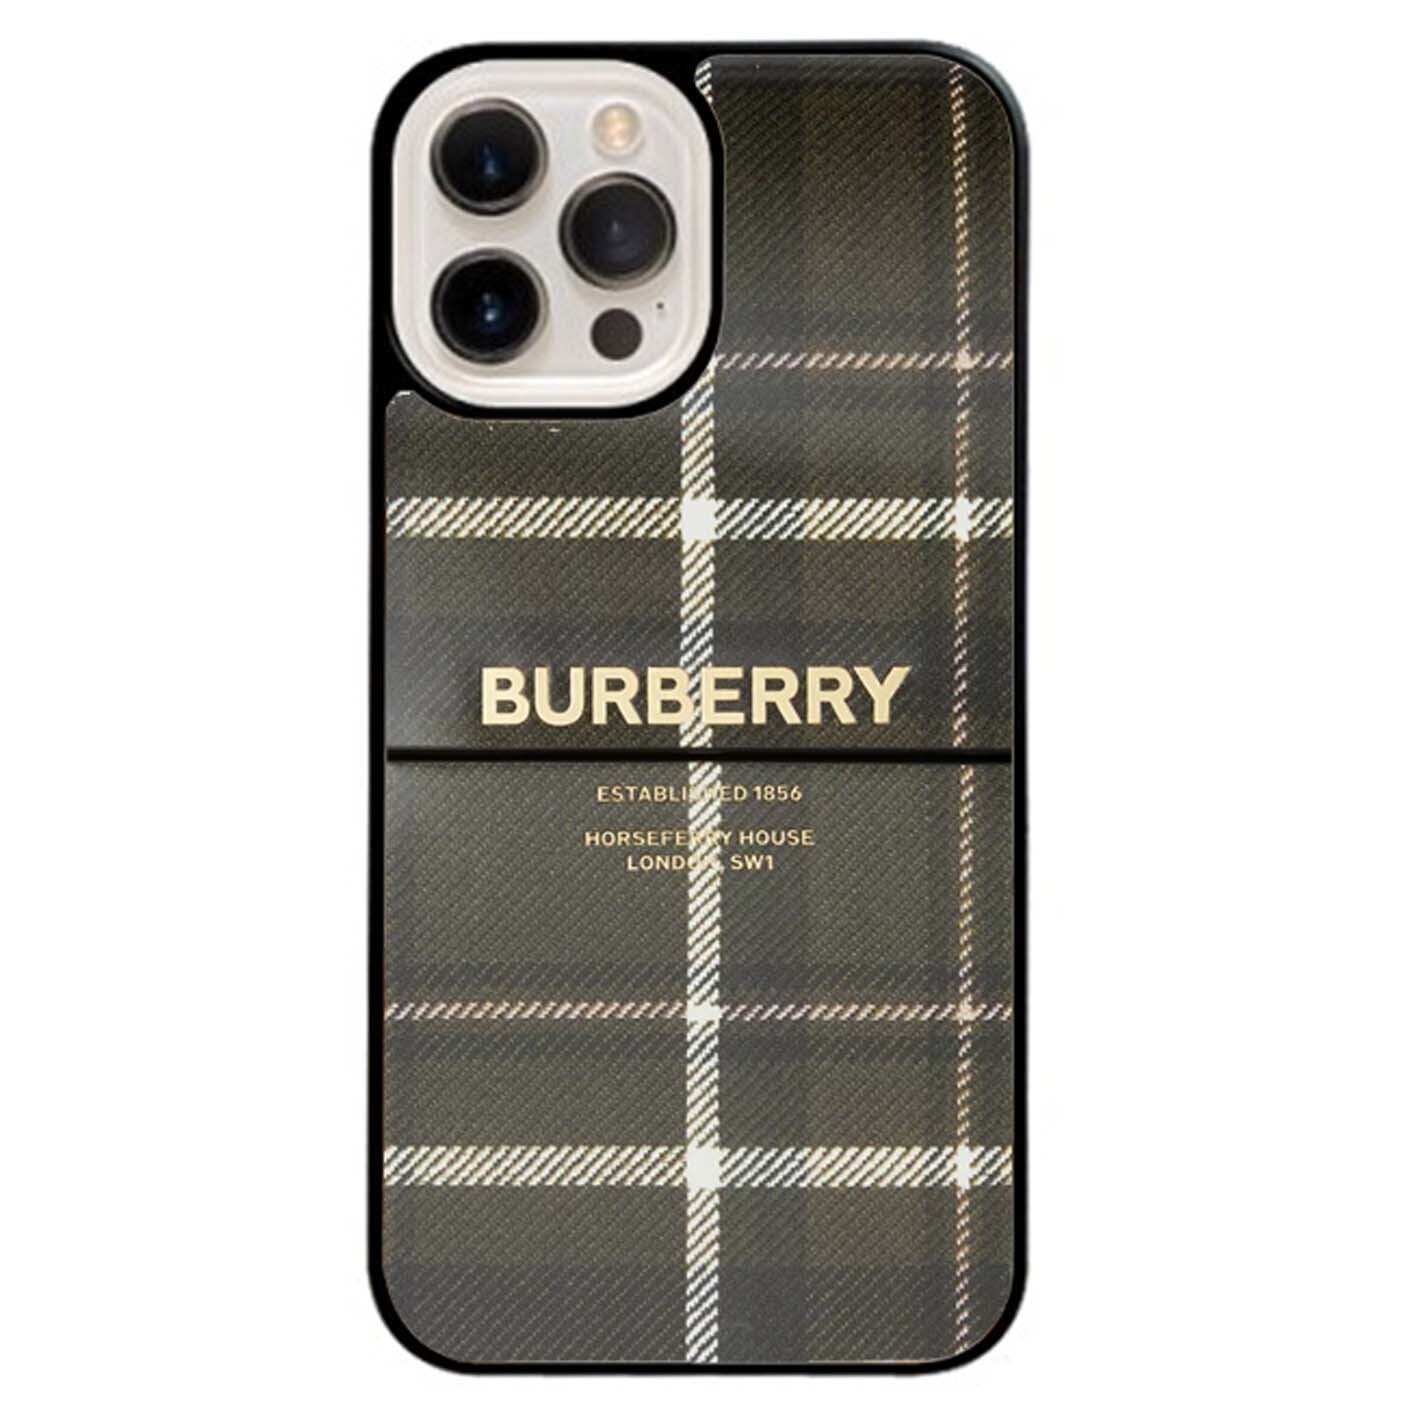 Shop Latest Burberry Iphone online 